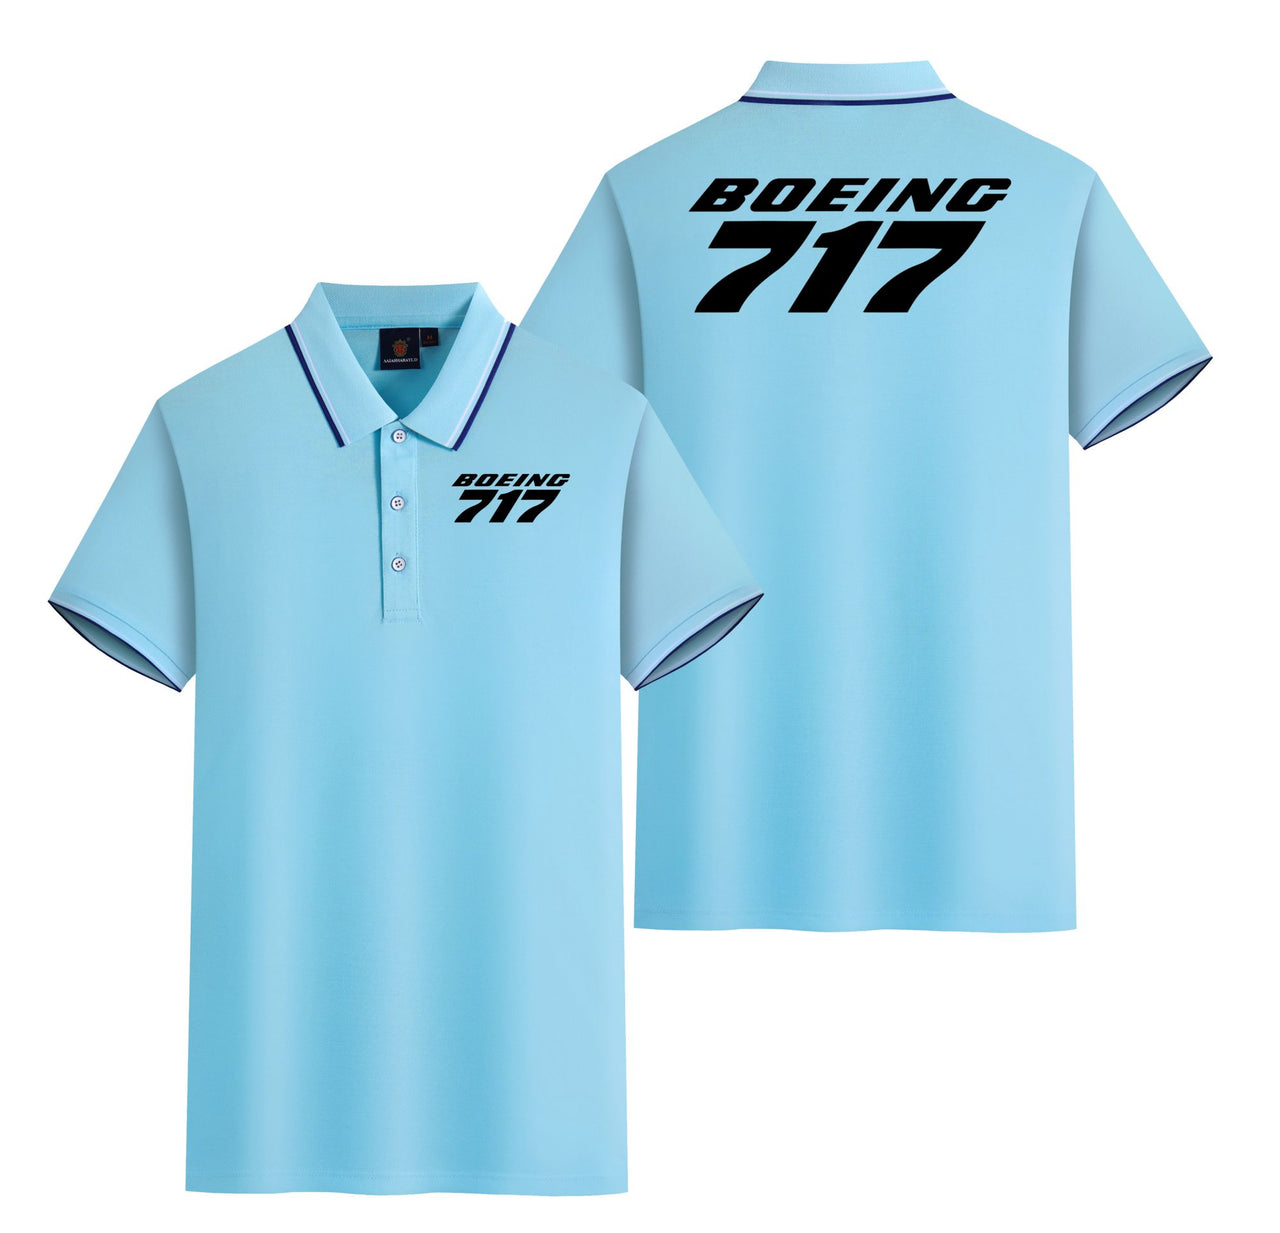 Boeing 717 & Text Designed Stylish Polo T-Shirts (Double-Side)